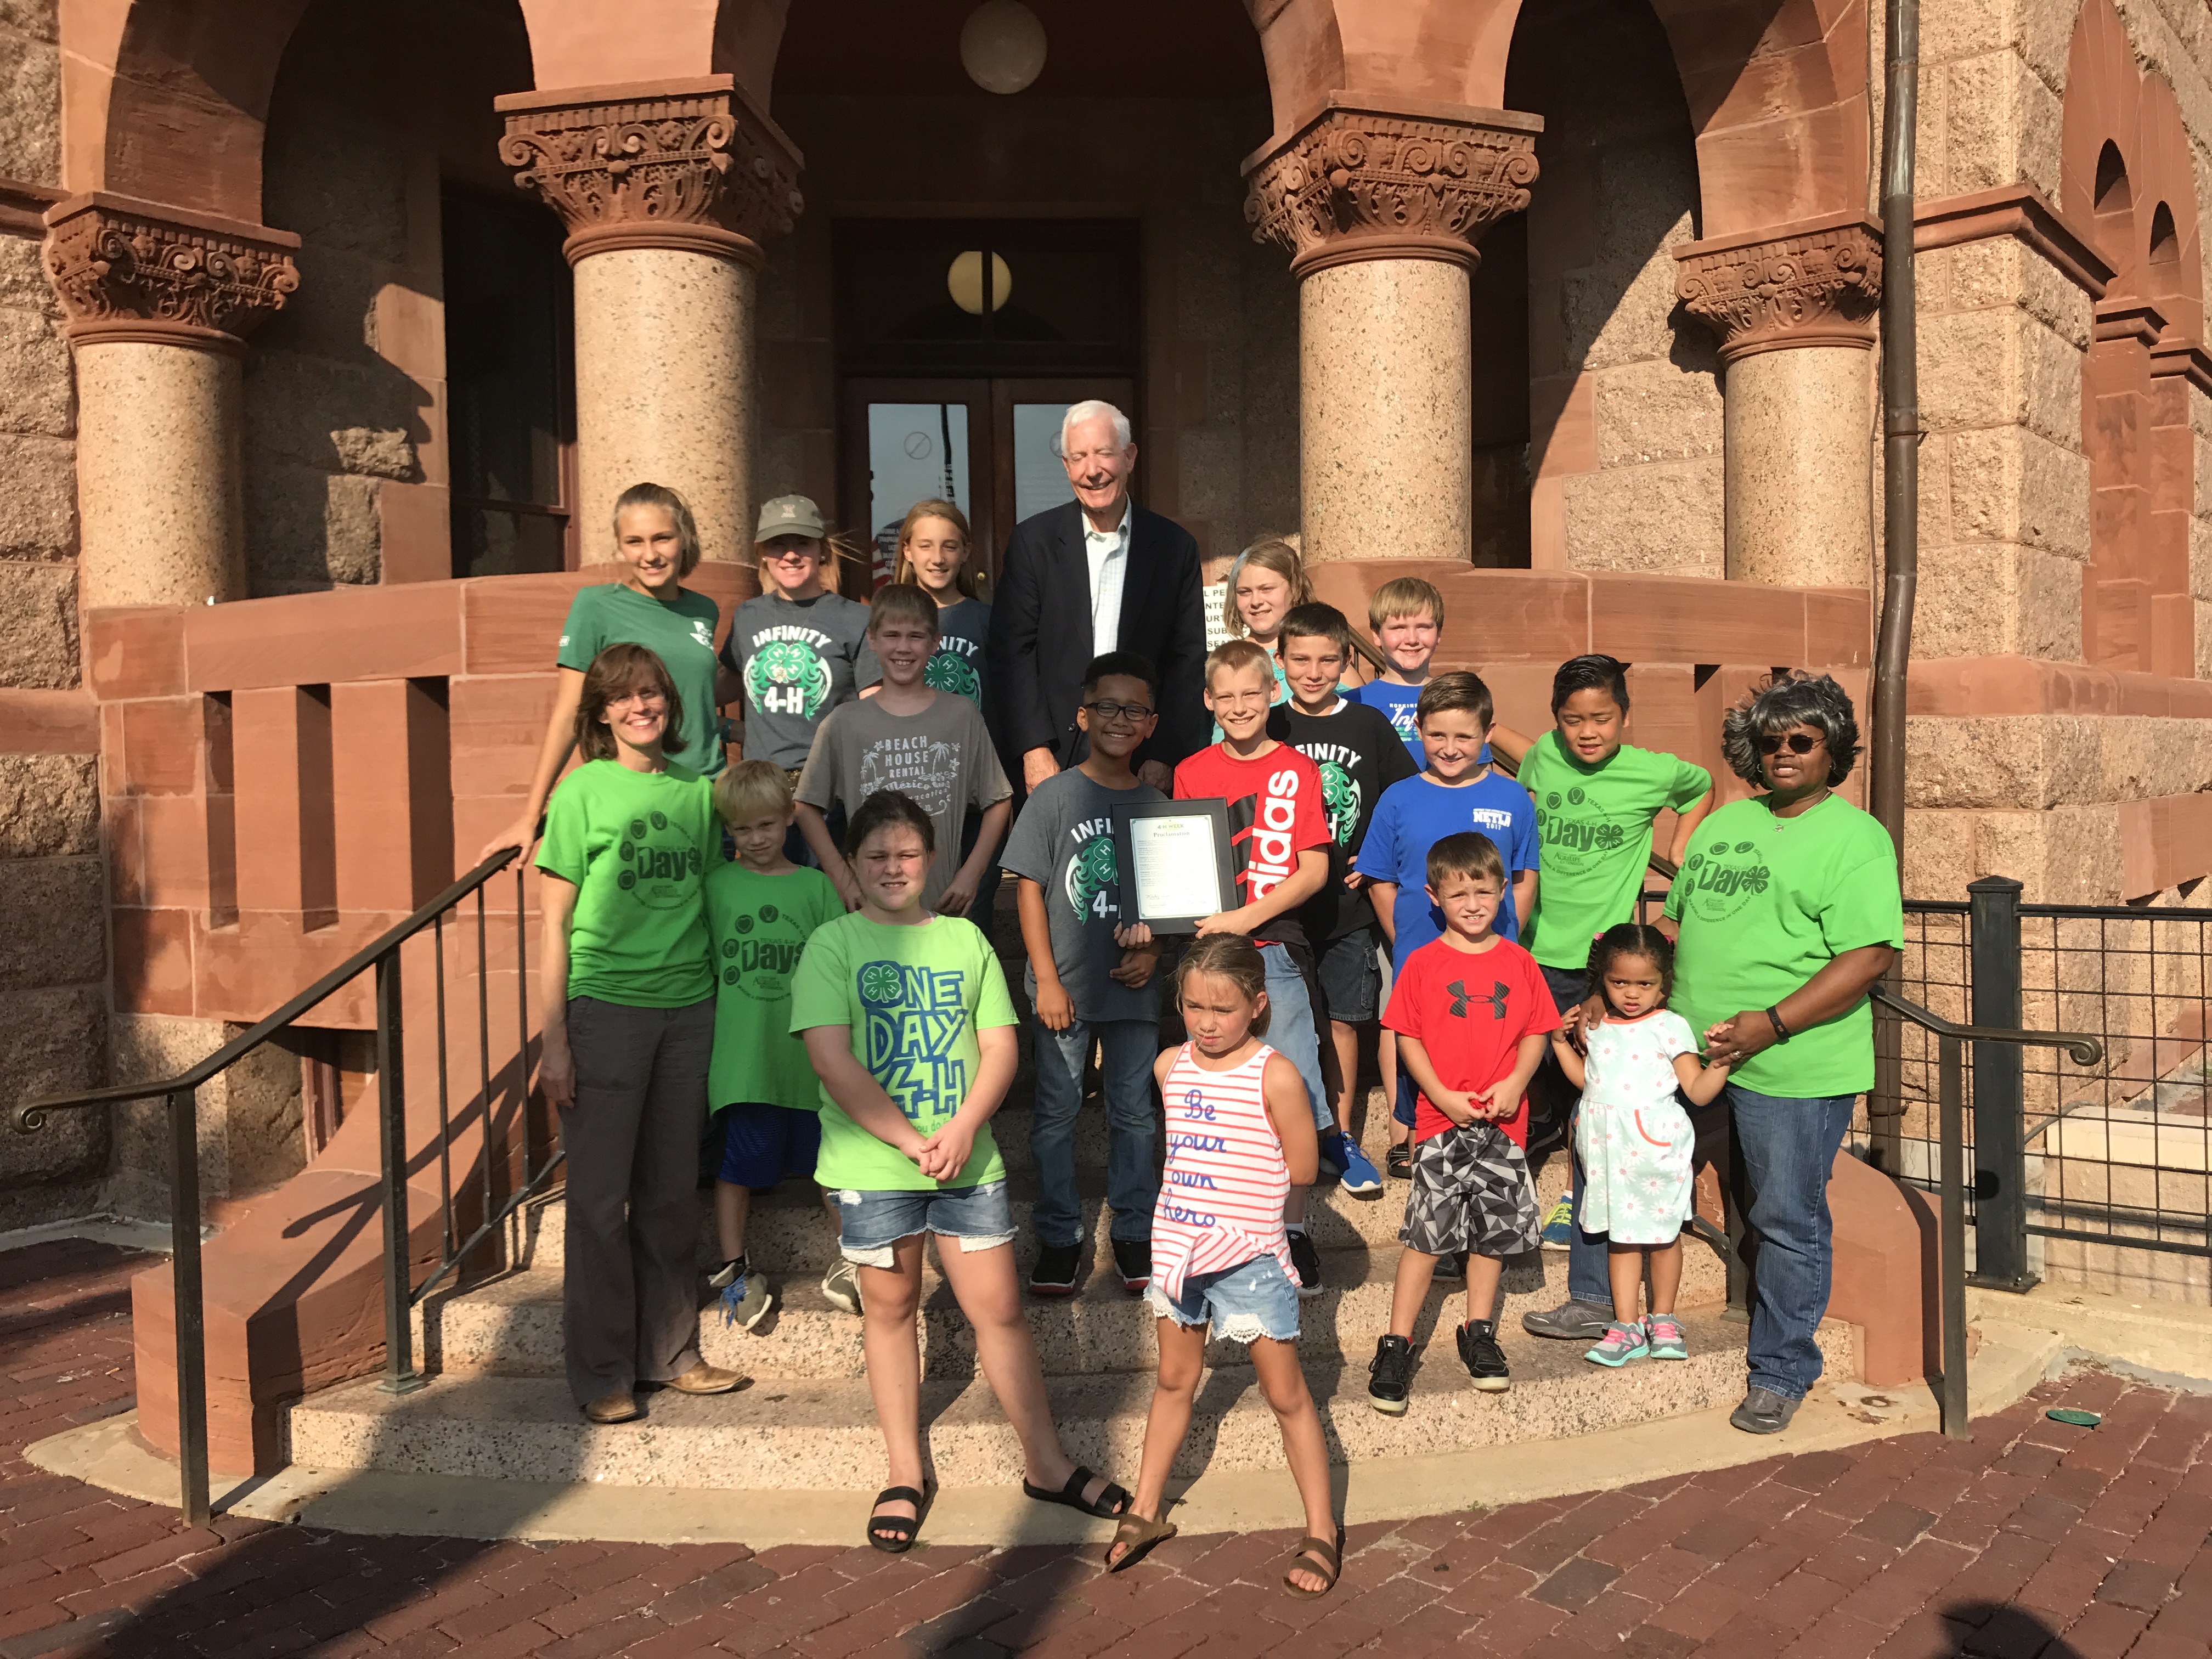 Hopkins County Commissioner’s Court Designates October 1-7, 2017 as National 4-H Week in Texas at Courthouse Proclamation